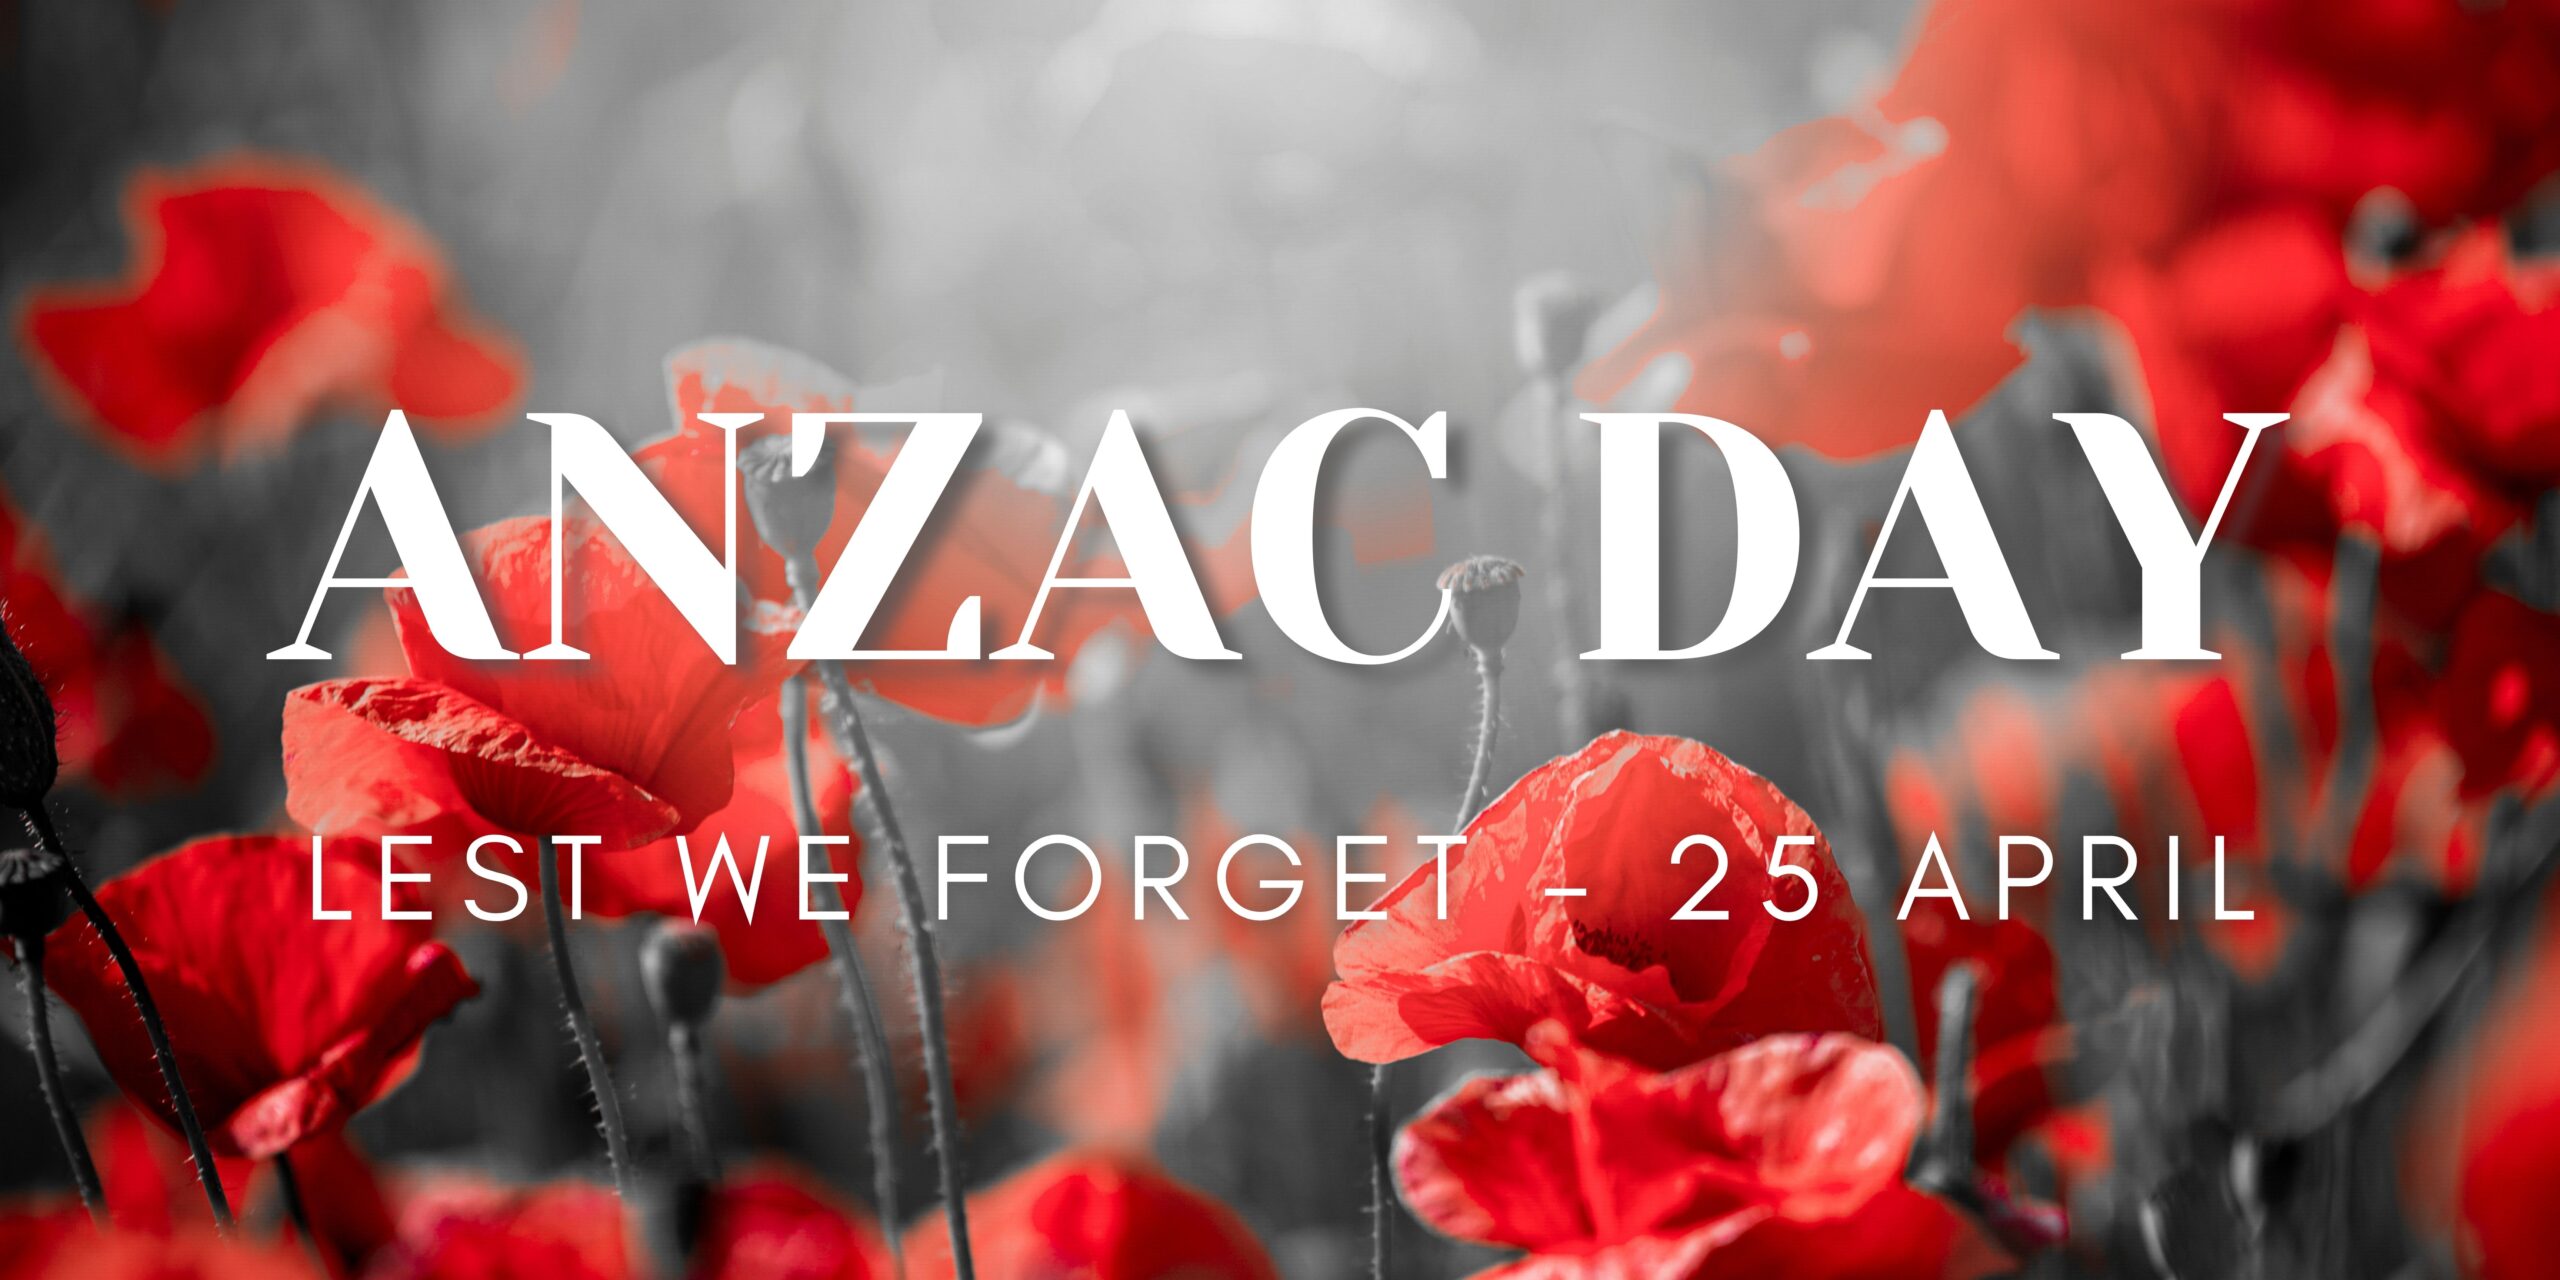 What is Anzac Day HaighleeRafiah